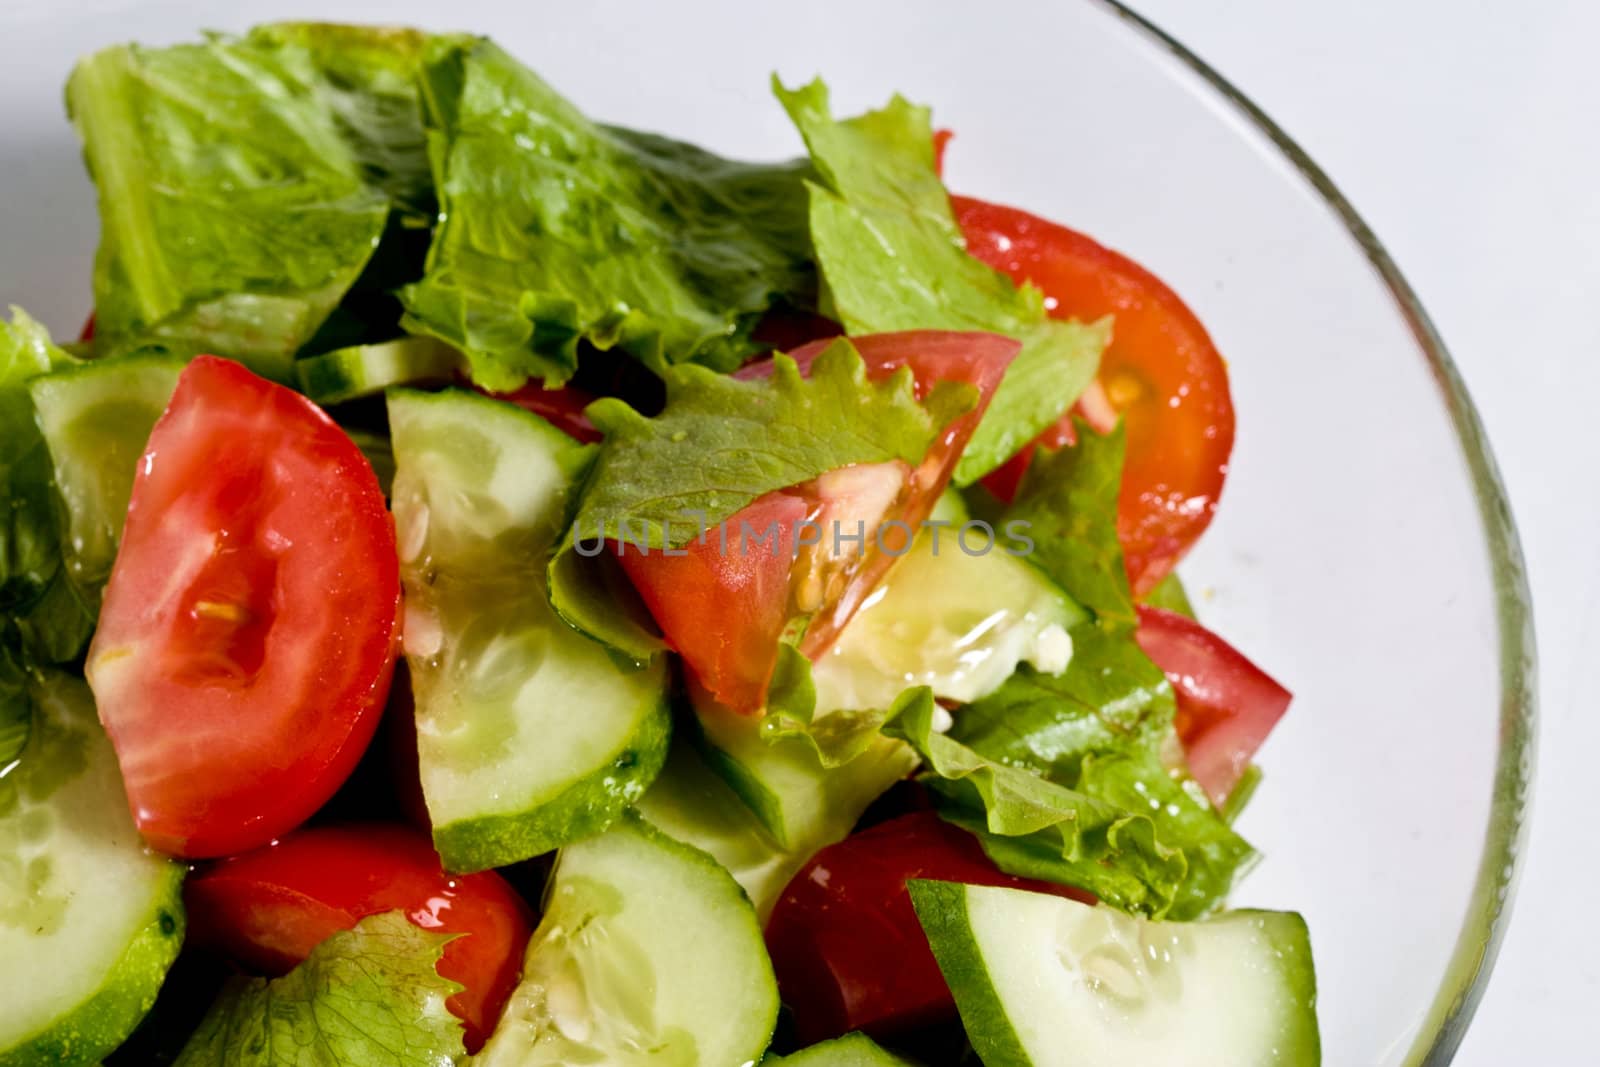 food series: healthy tomato and cucumber salad